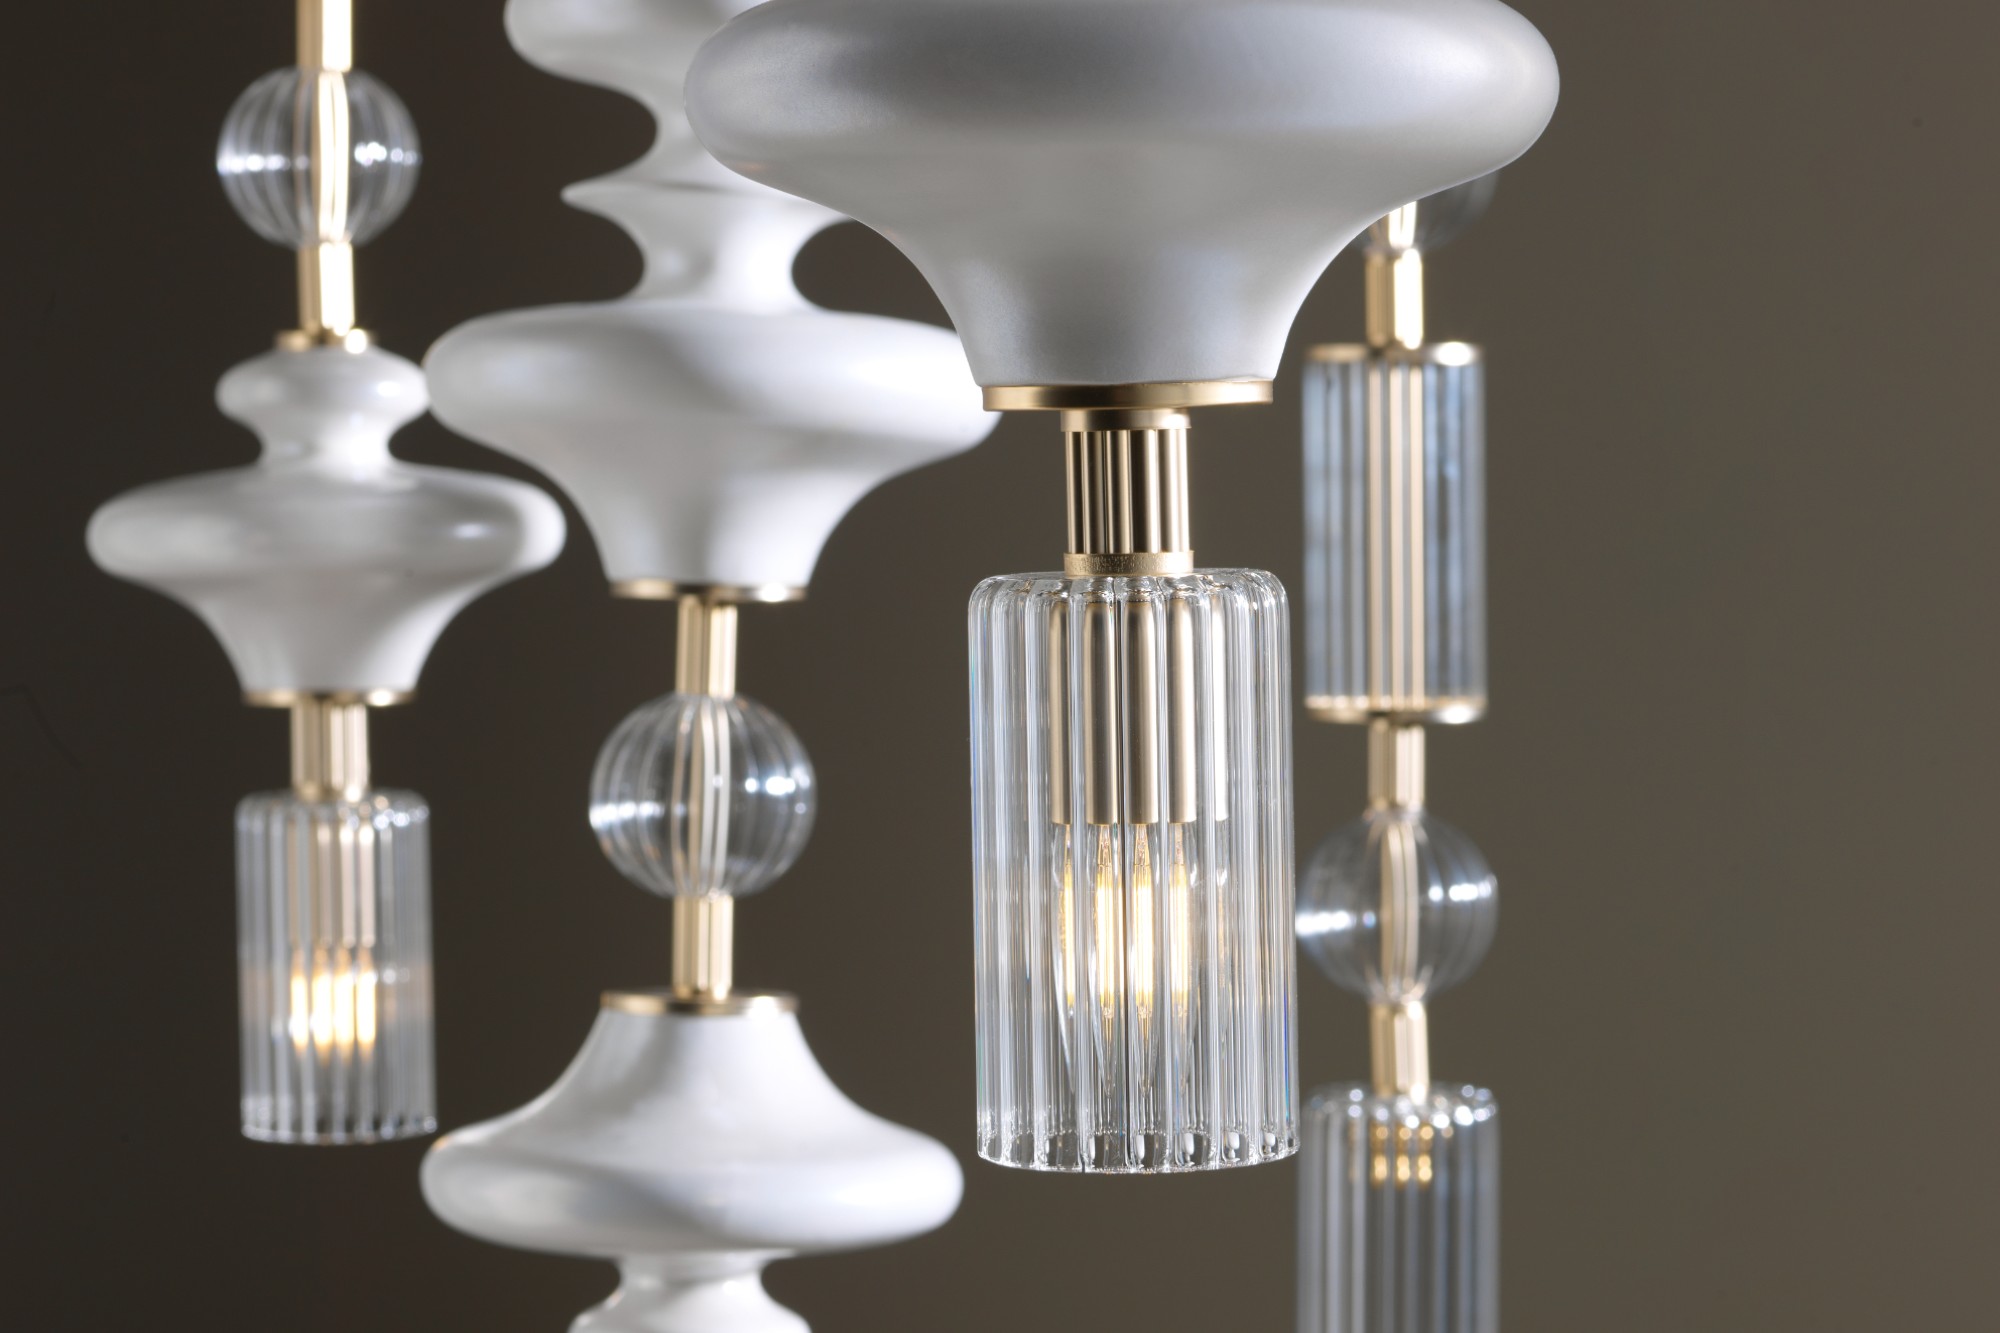 IDS introduces “Rogue” light collection by Lorenzon